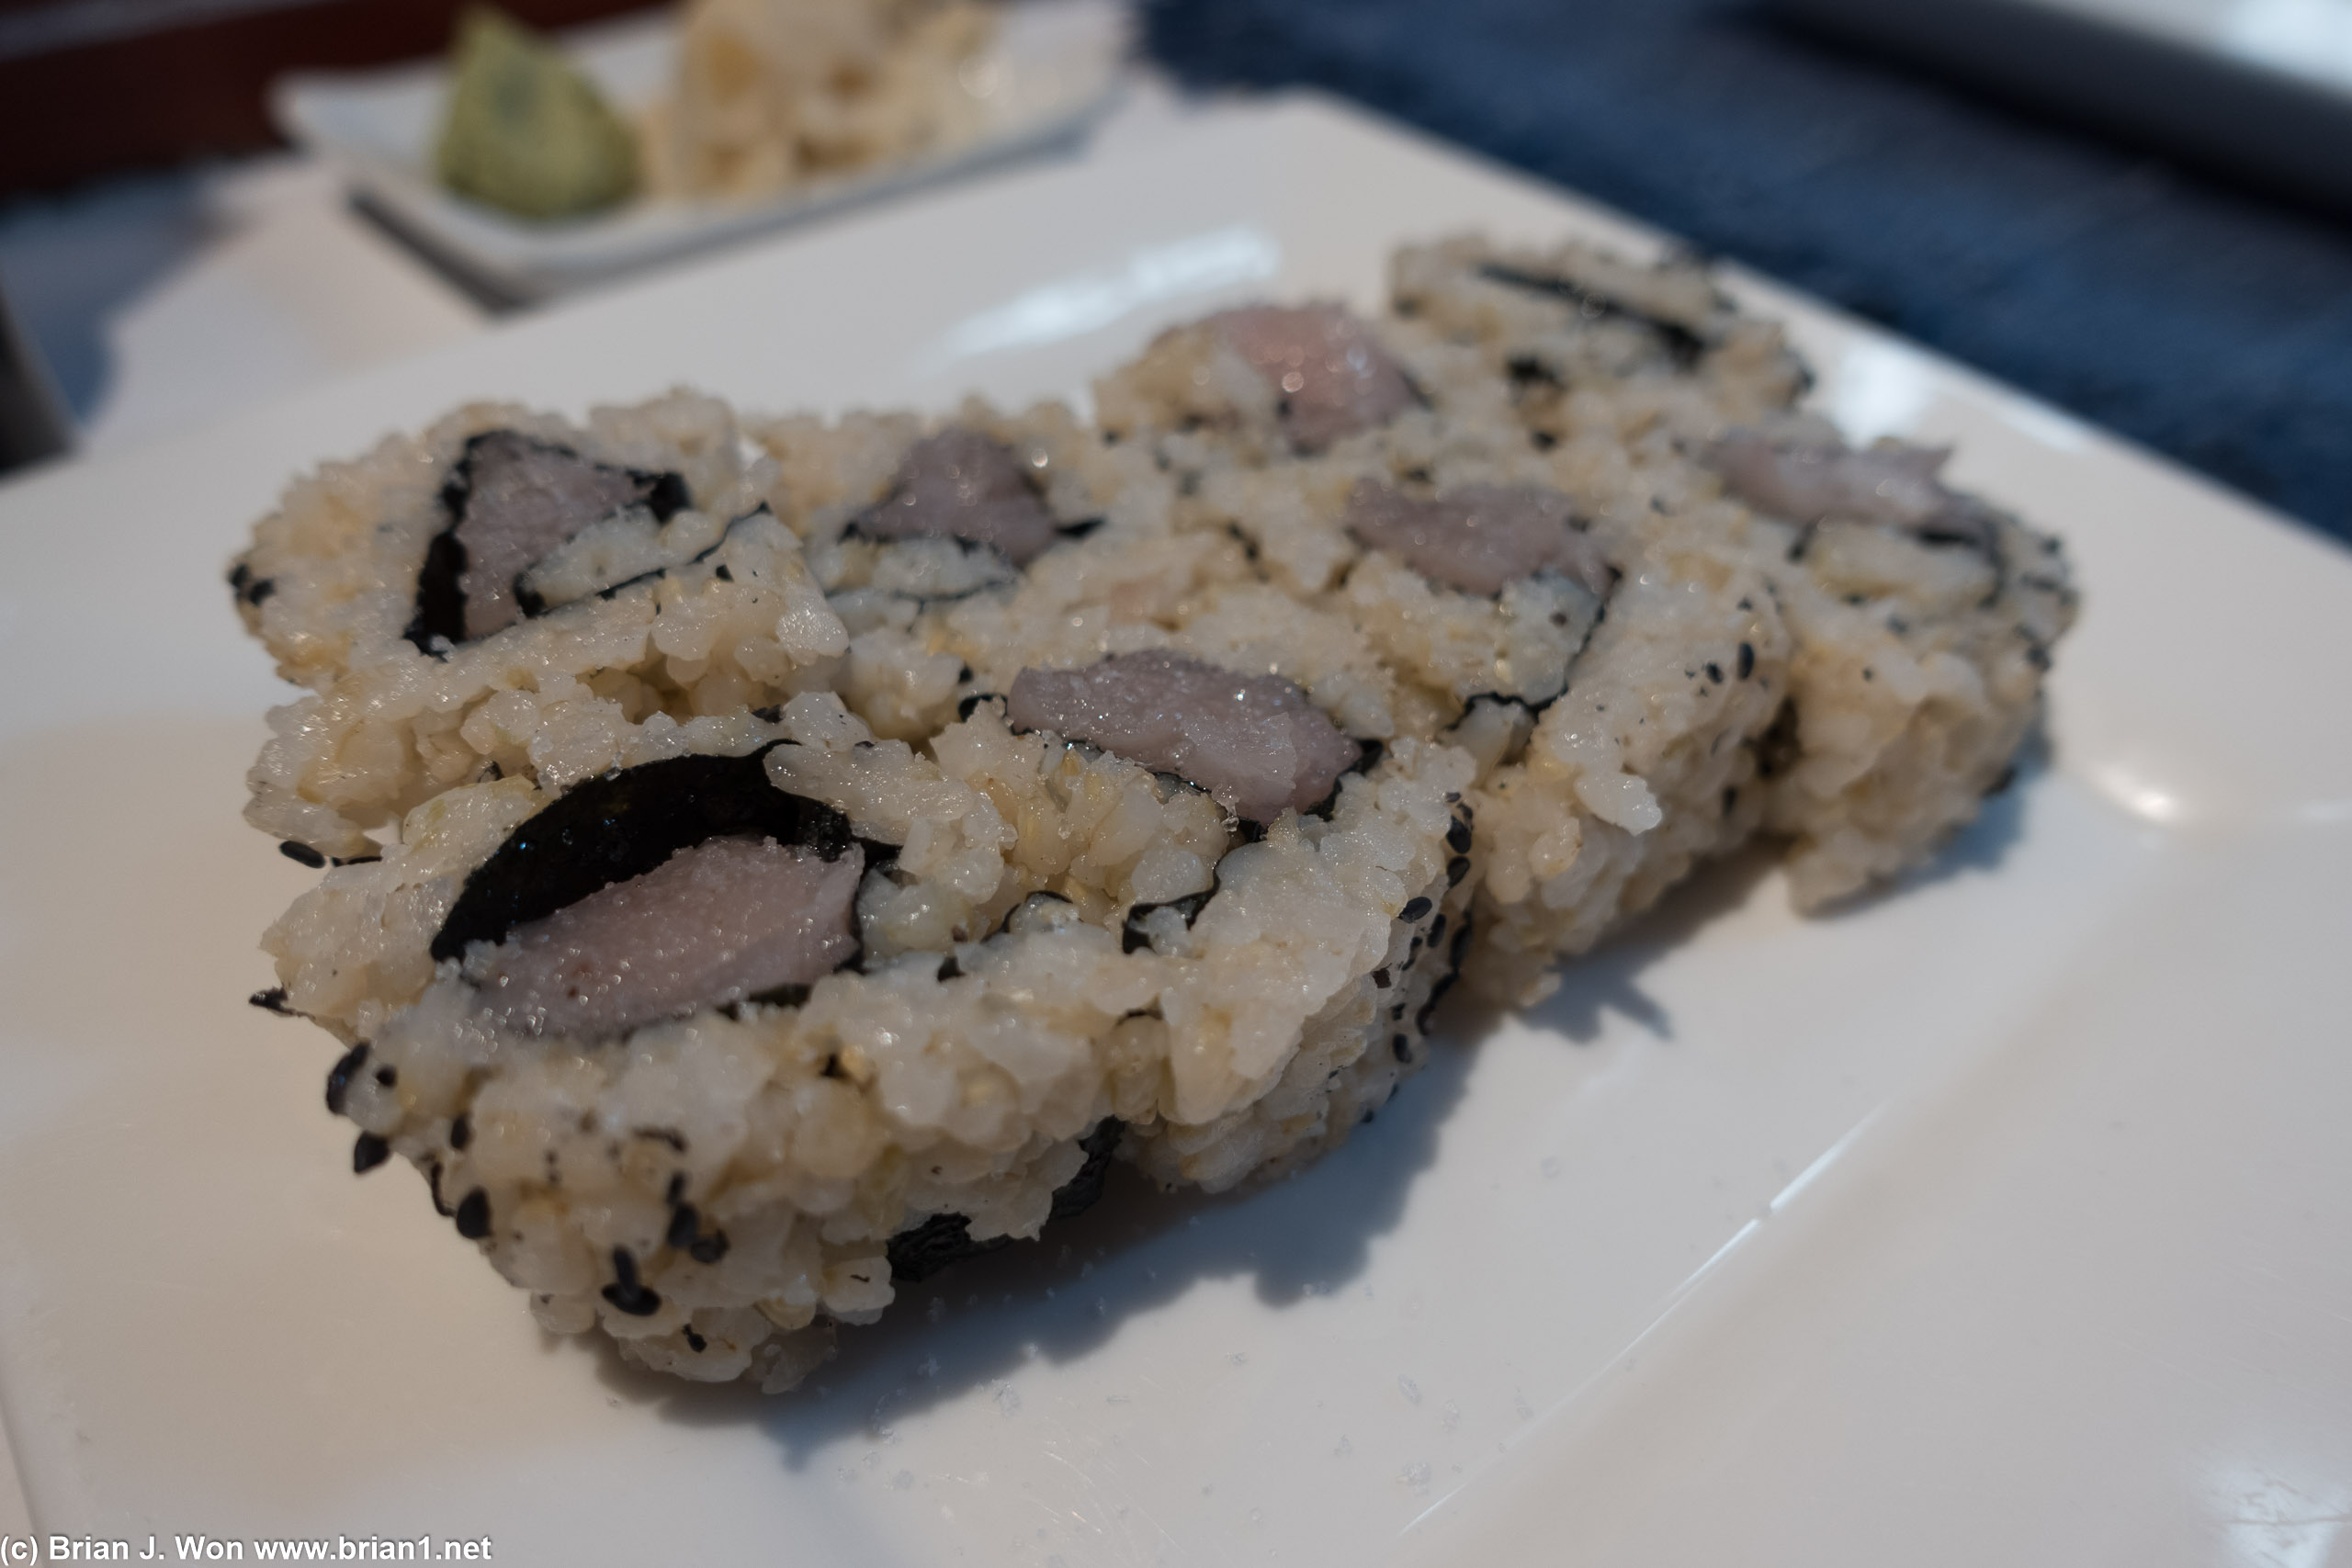 Not sure why they say their truffle salt albacore roll is very famous, but it's not bad.